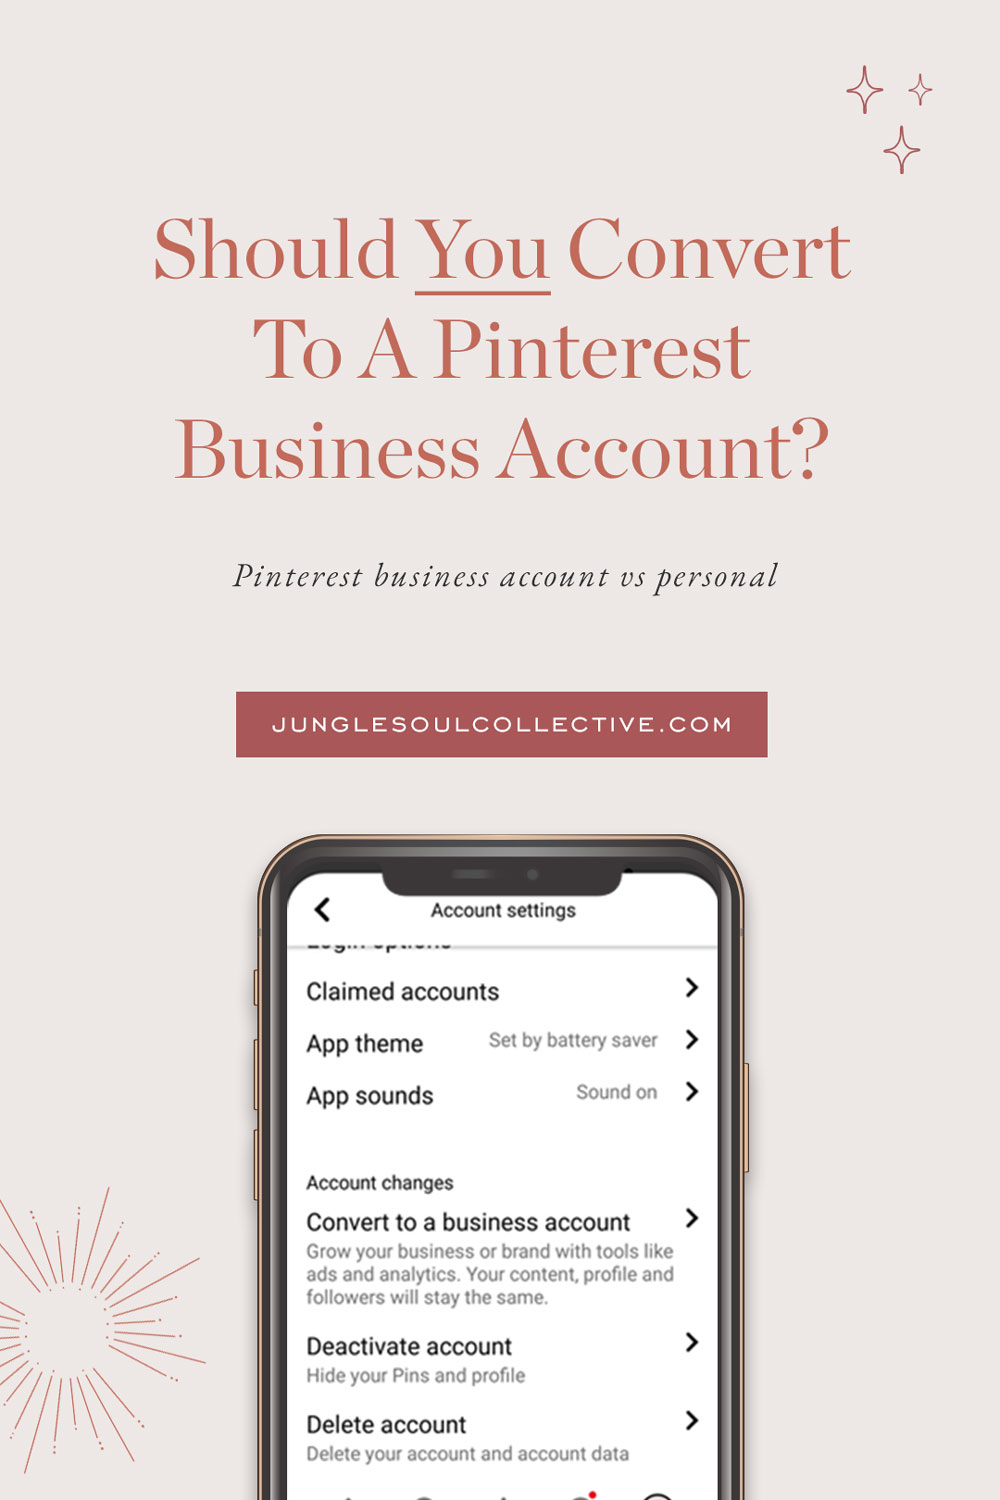 Pinterest business account vs personal